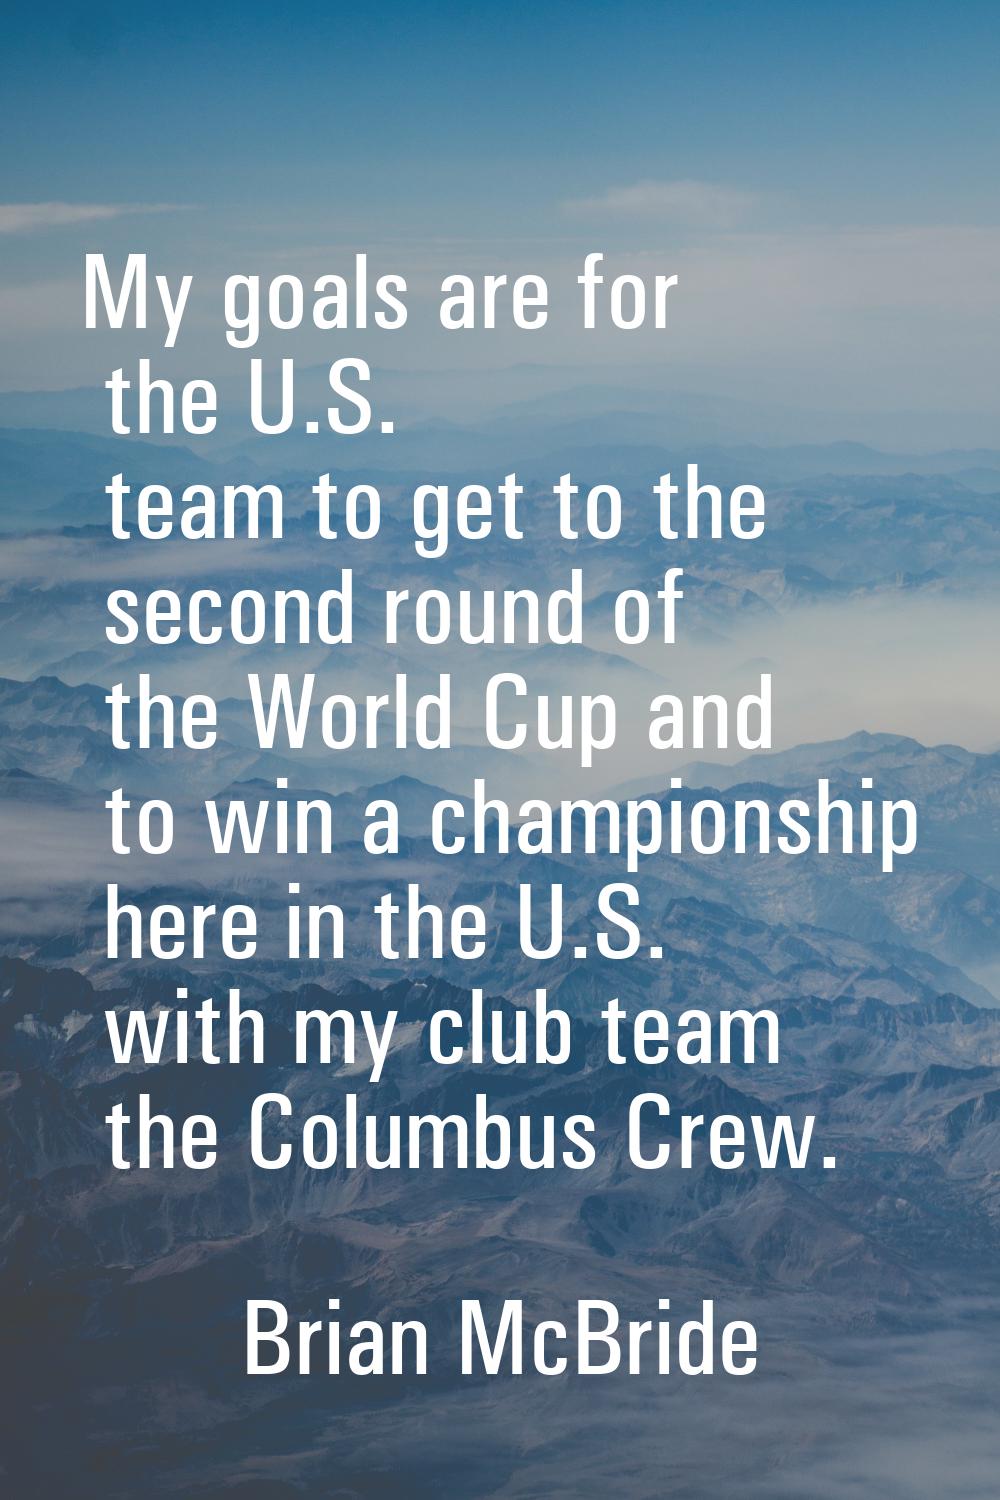 My goals are for the U.S. team to get to the second round of the World Cup and to win a championshi